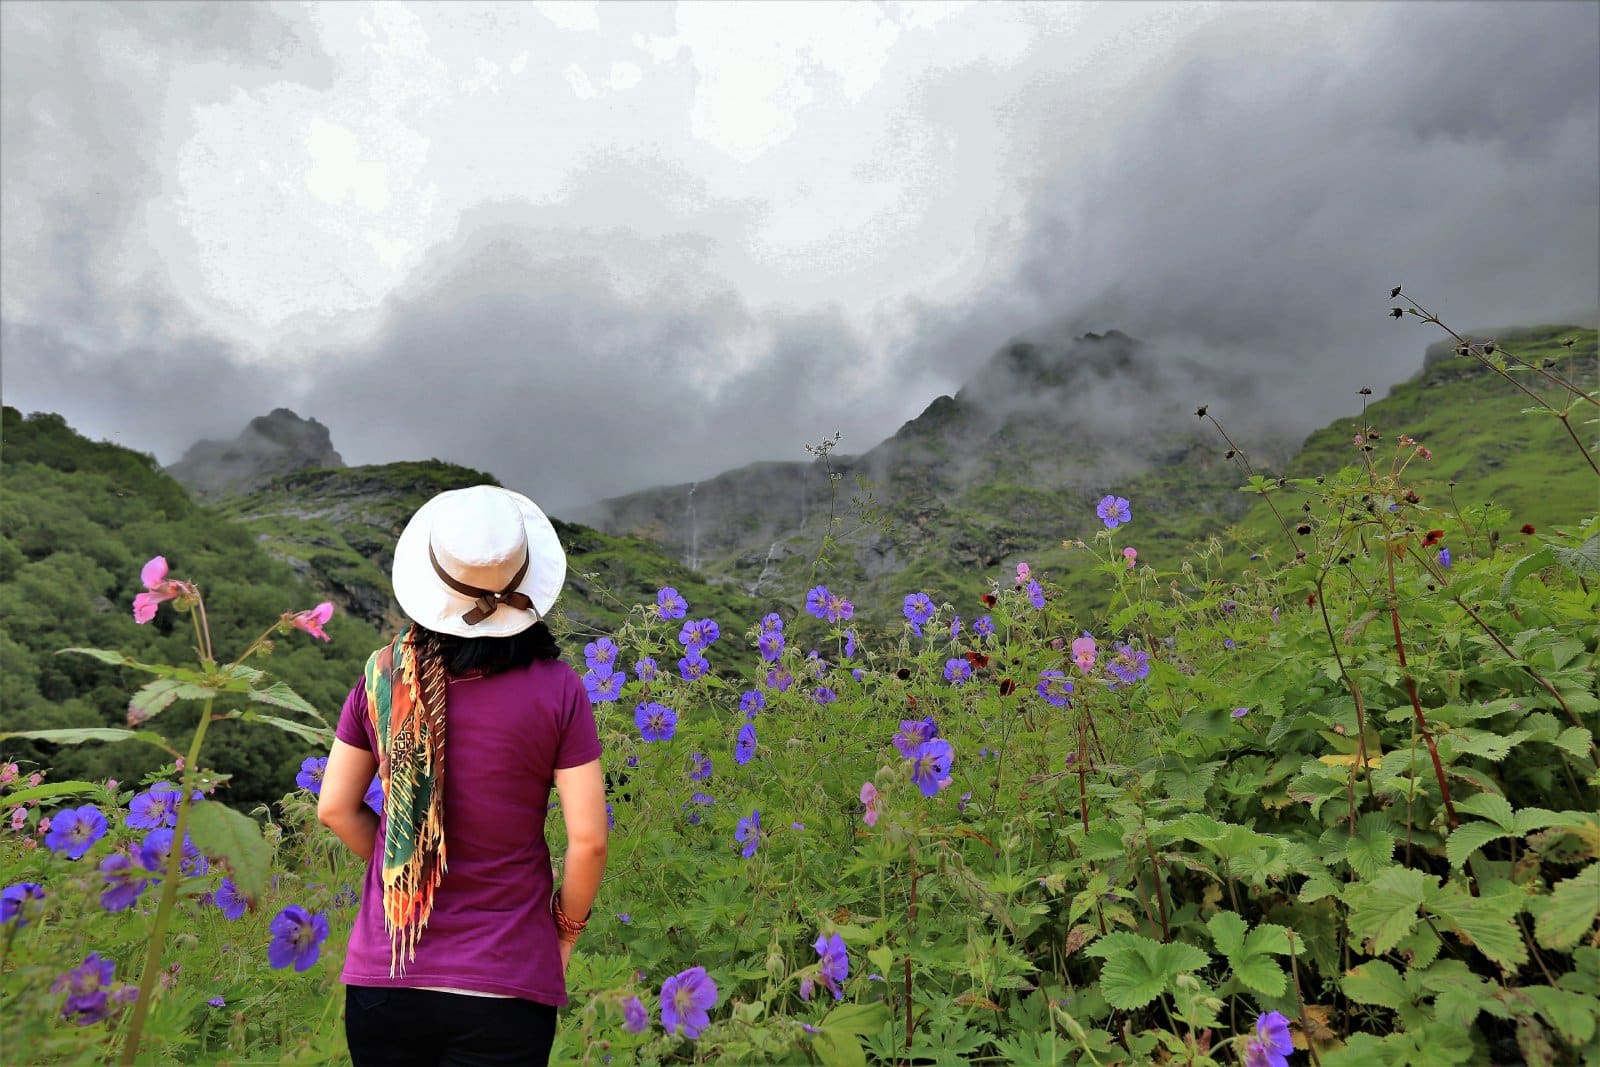 <p class="wp-caption-text">Image Credit: Shutterstock / lakkana savaksuriyawong</p>  <p><span>Nestled in the high altitudes of the Himalayas in Uttarakhand, the Valley of Flowers National Park is a UNESCO World Heritage Site renowned for its meadows of endemic alpine flowers and outstanding natural beauty. This park, accessible only by foot, is a haven for botanists, nature lovers, and trekkers, offering a landscape that blooms with a vibrant tapestry of flora from June to October. The valley also provides habitat for rare and endangered animals, including the Asiatic black bear, snow leopard, and blue sheep. The trek to the valley, starting from Govindghat, is as spectacular as the destination, with breathtaking views of the surrounding mountains and waterfalls.</span></p>